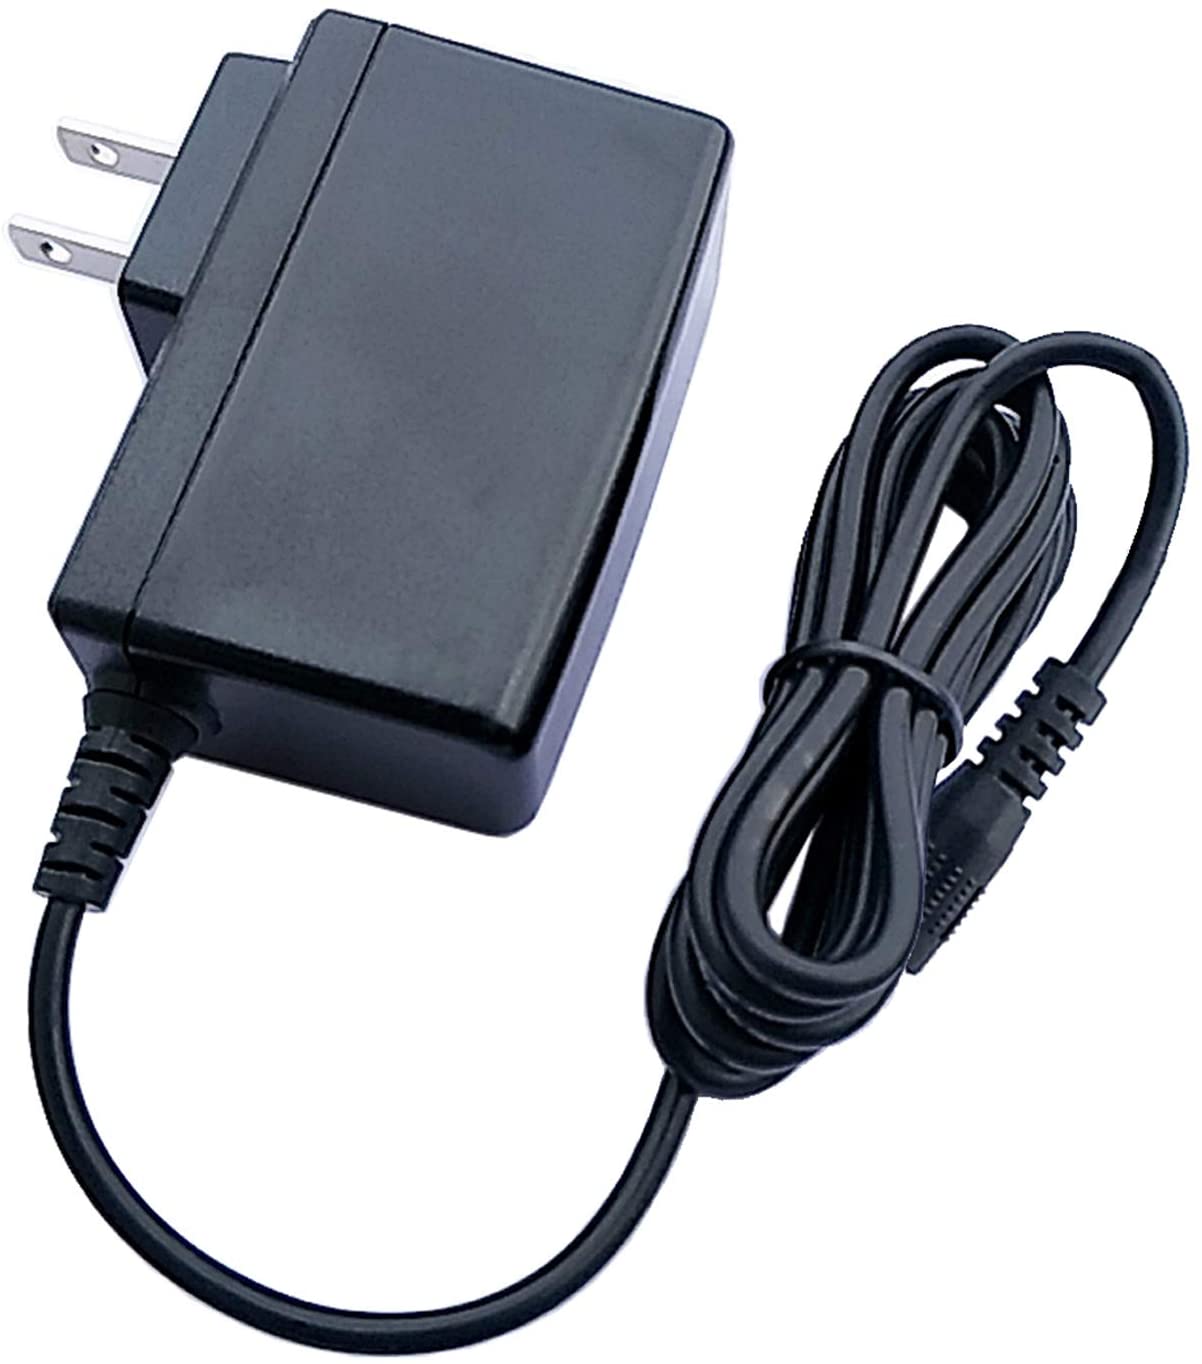 UPBRIGHT AC Adapter For LIQUIDVIDEO ADPV26A DVD Player Charger Power Supply Cord PSU - image 2 of 5